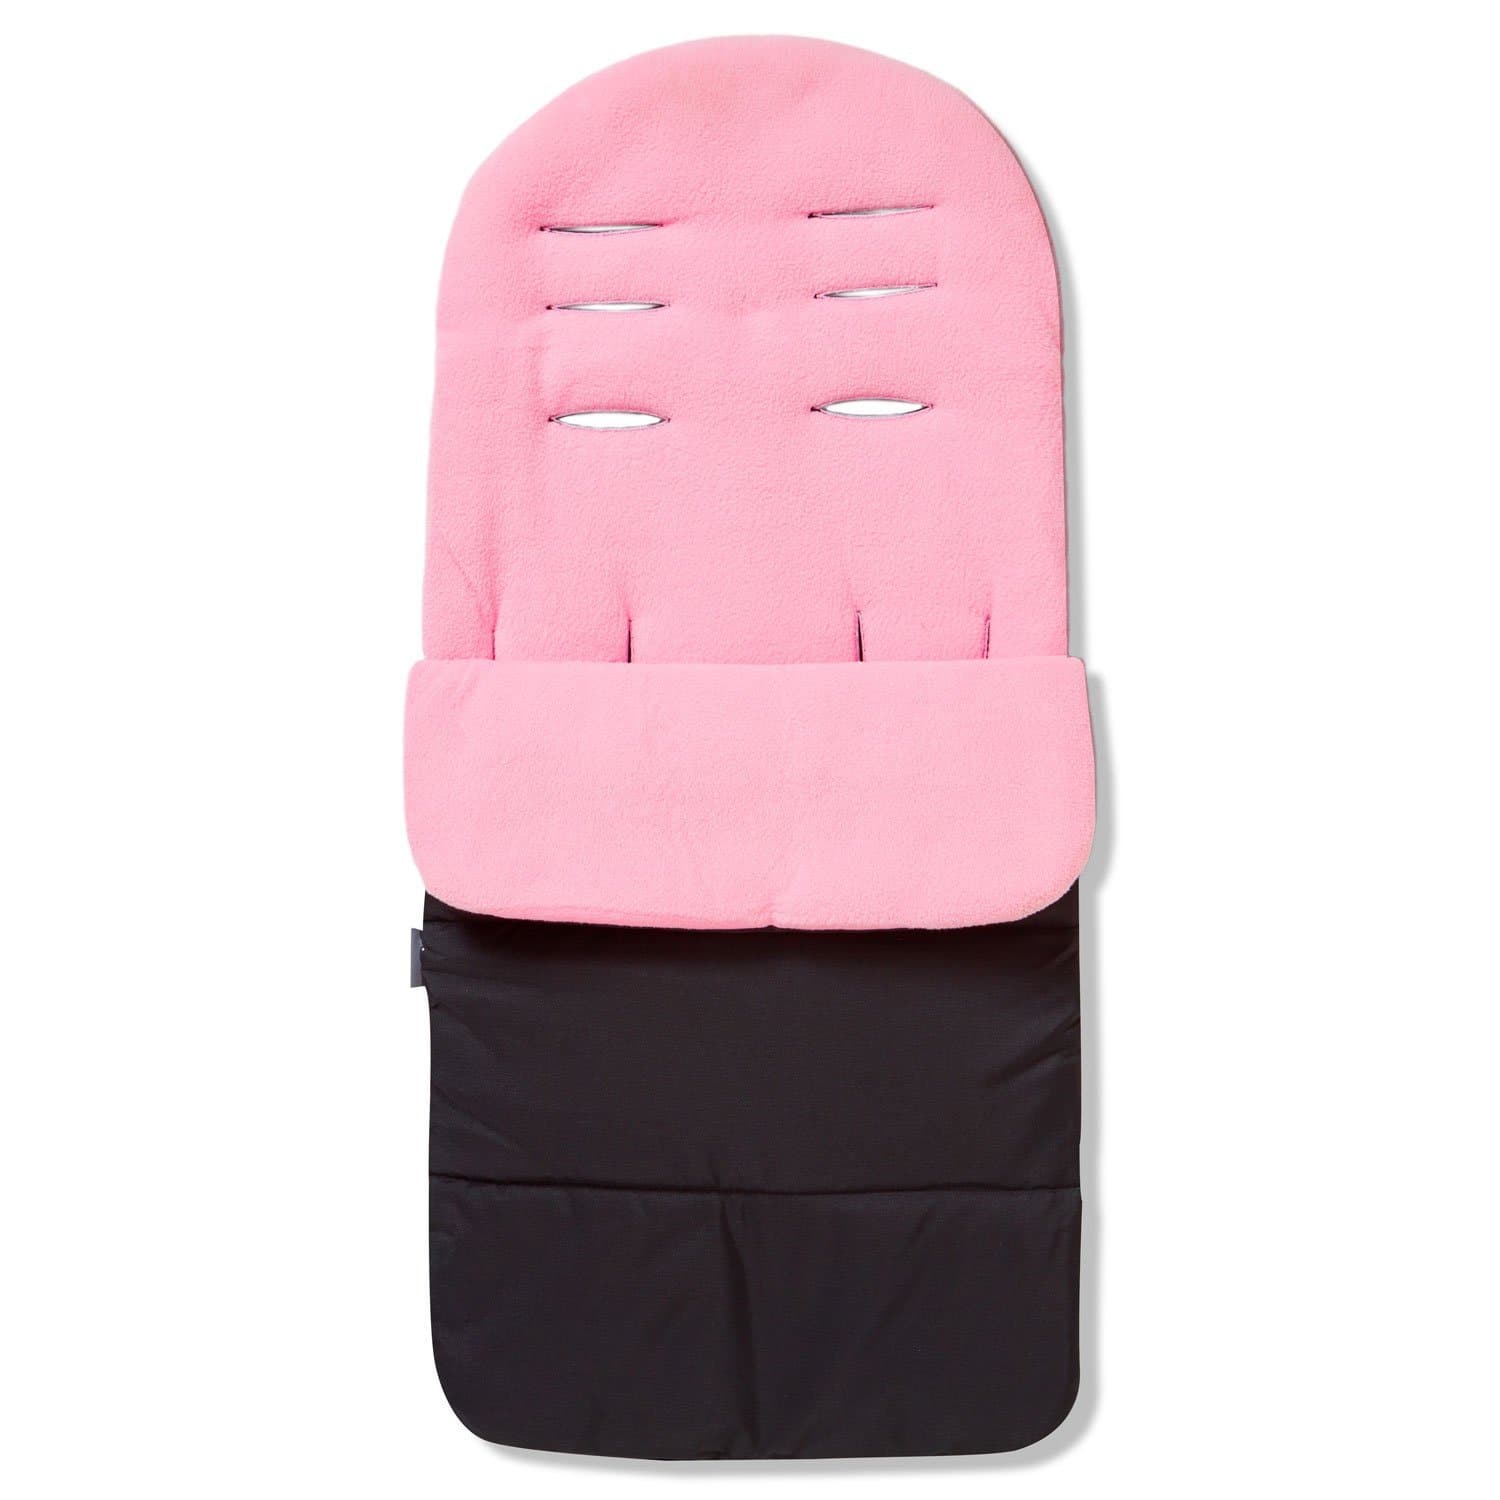 Premium Footmuff / Cosy Toes Compatible with Cybex - Pink Rose / Fits All Models | For Your Little One